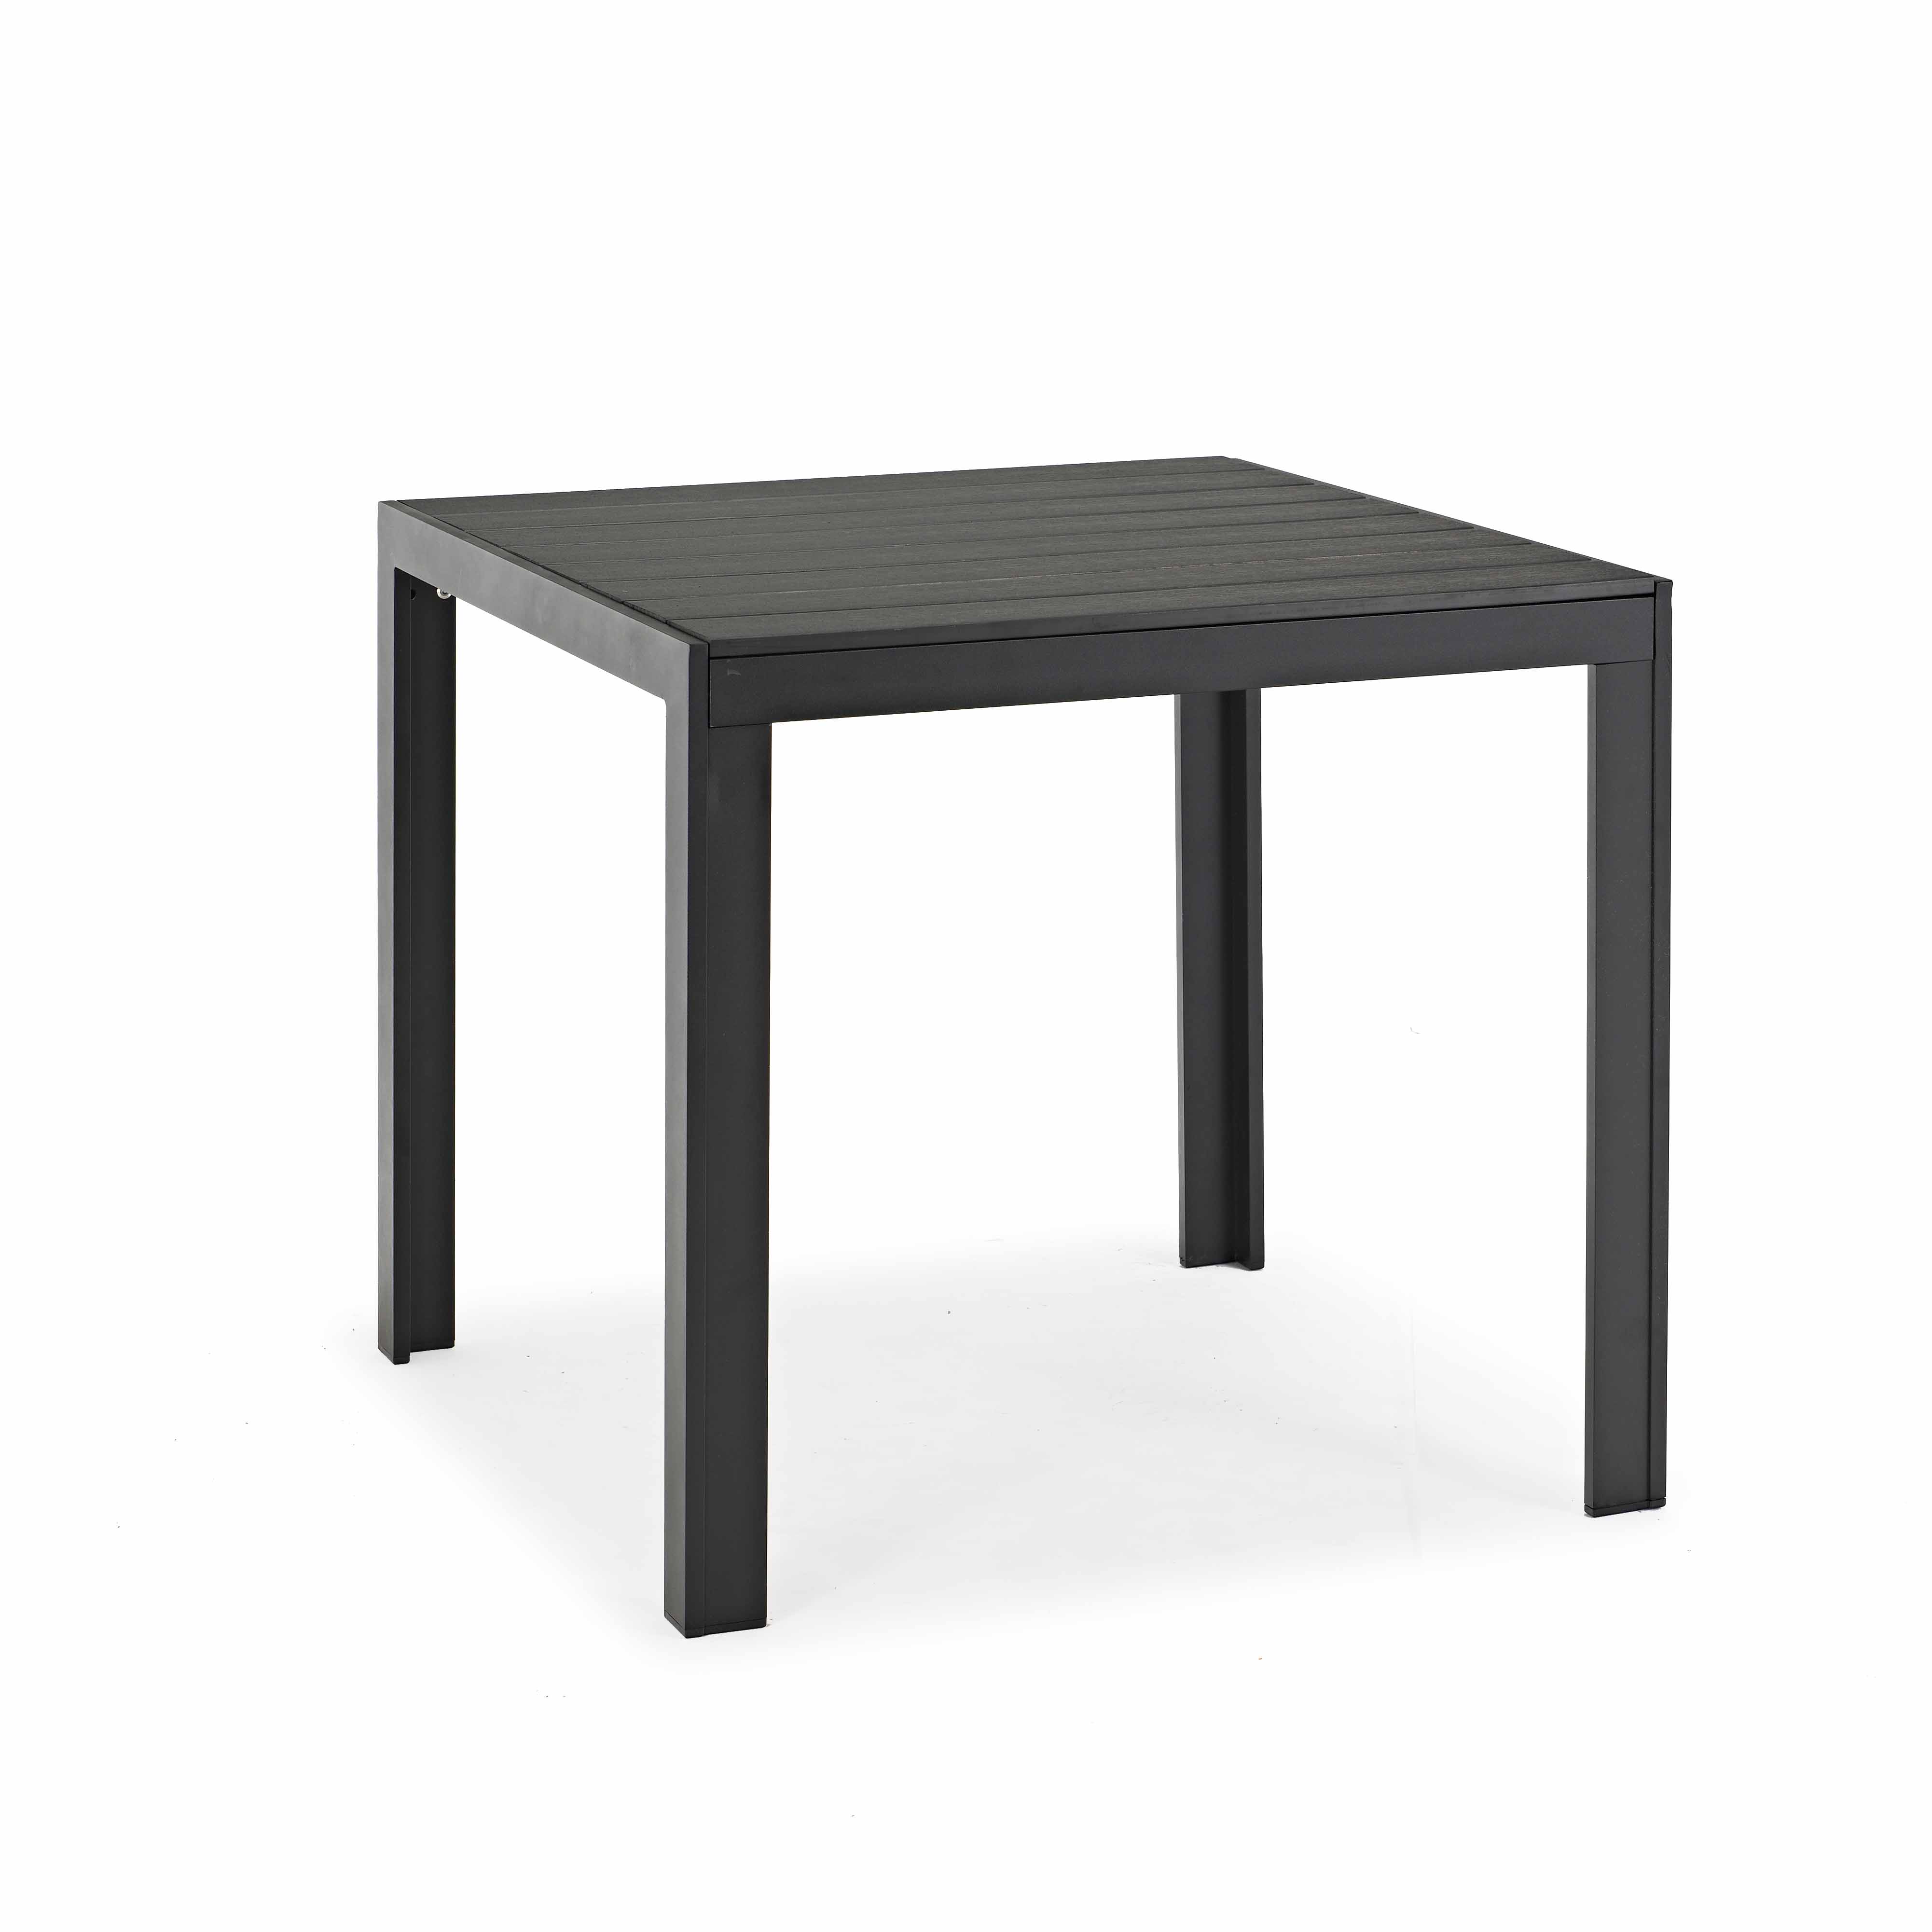 Plastic wood table and chair material performance